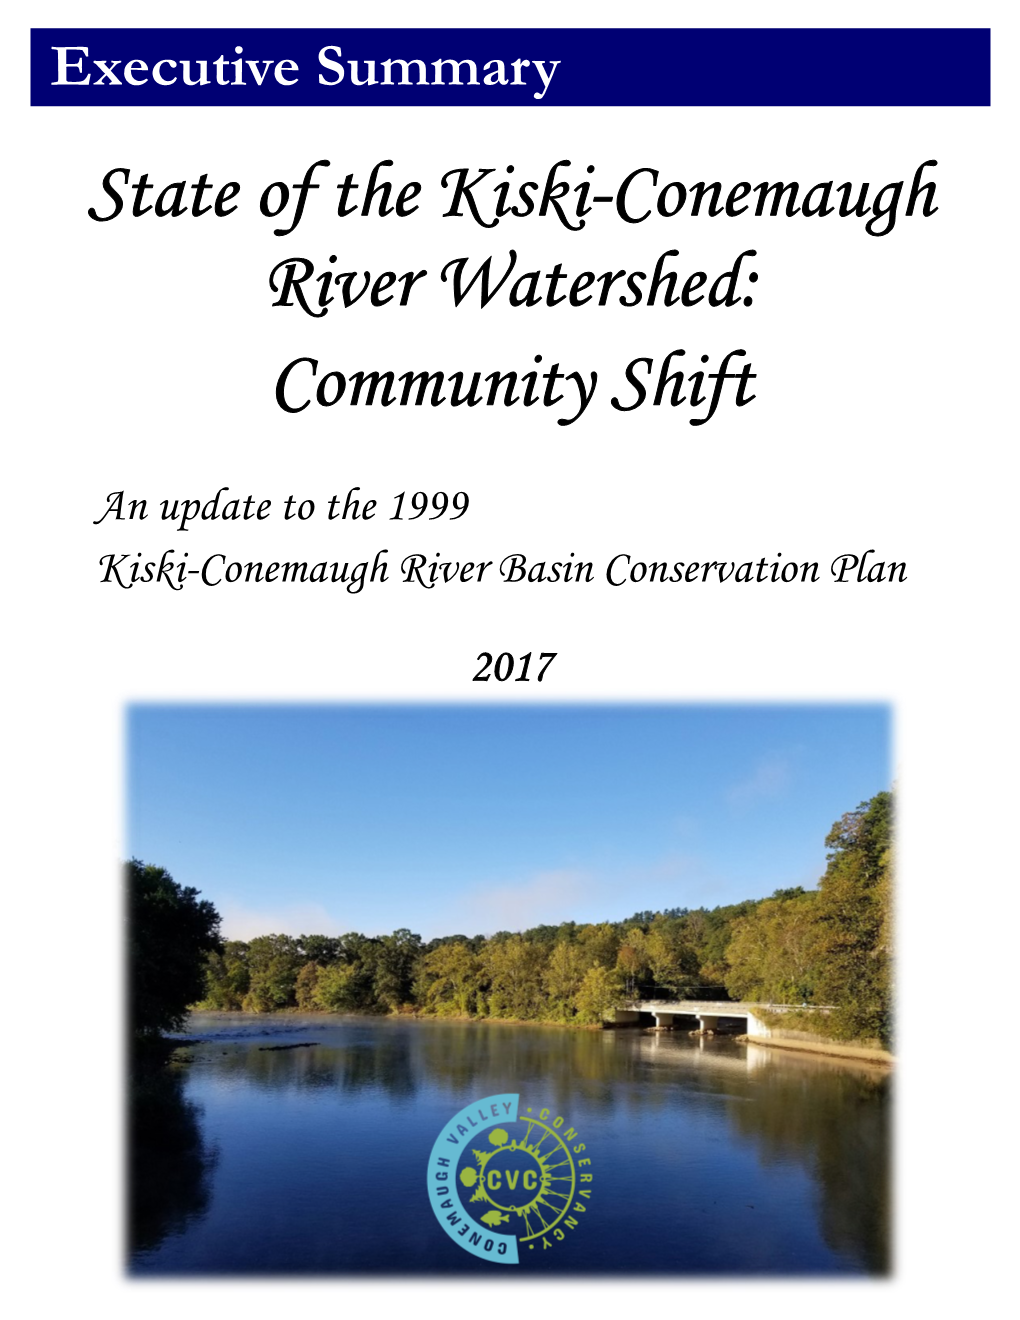 State of the Kiski-Conemaugh River Watershed: Community Shift